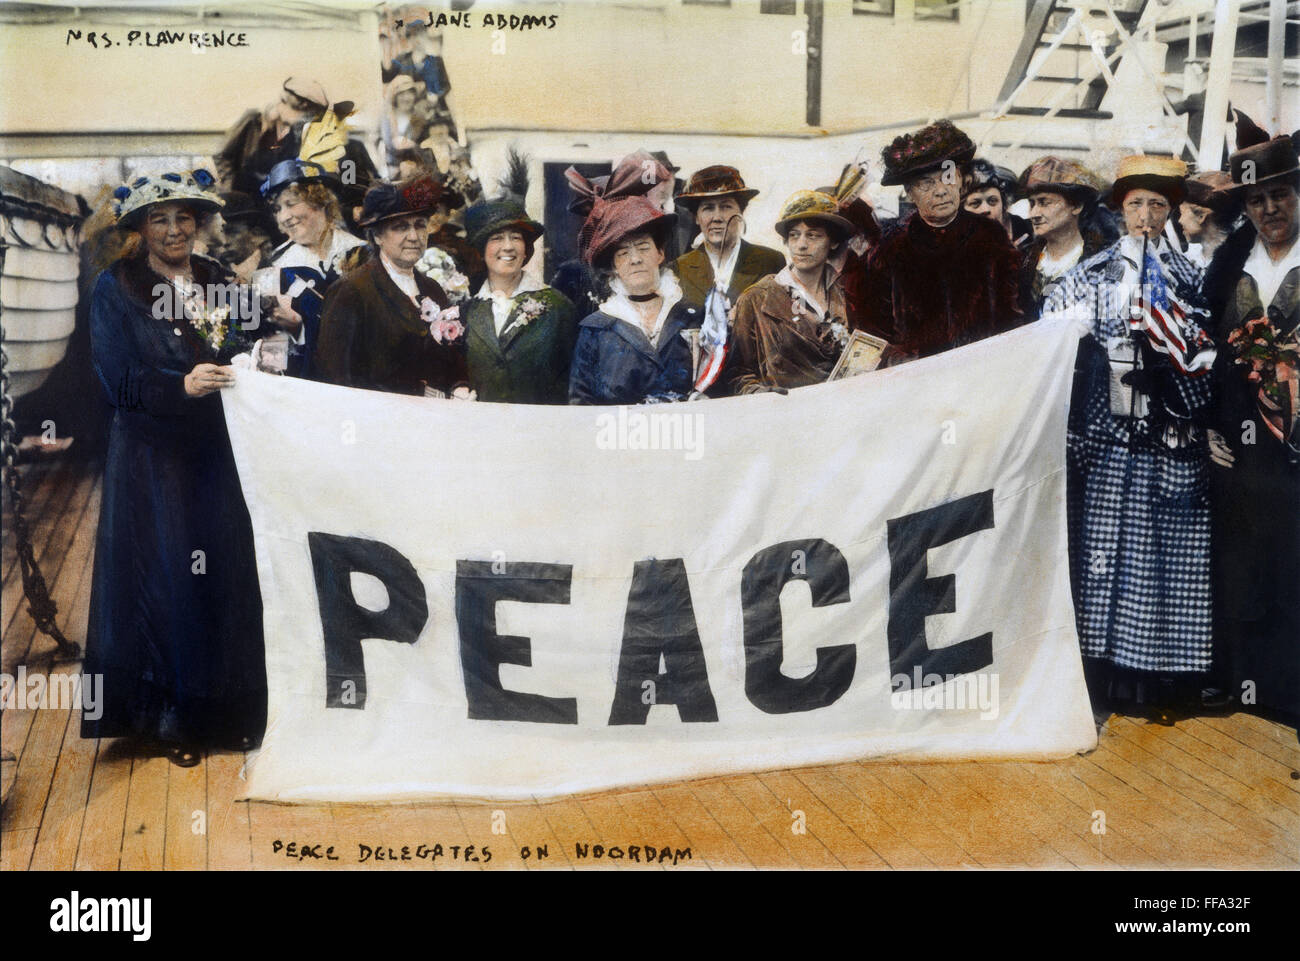 PACIFISM: JANE ADDAMS, 1915. /nJane Addams and fellow pacifists on the S.S. Noordam enroute to Europe in 1915. Oil over a photograph, 1915. Stock Photo